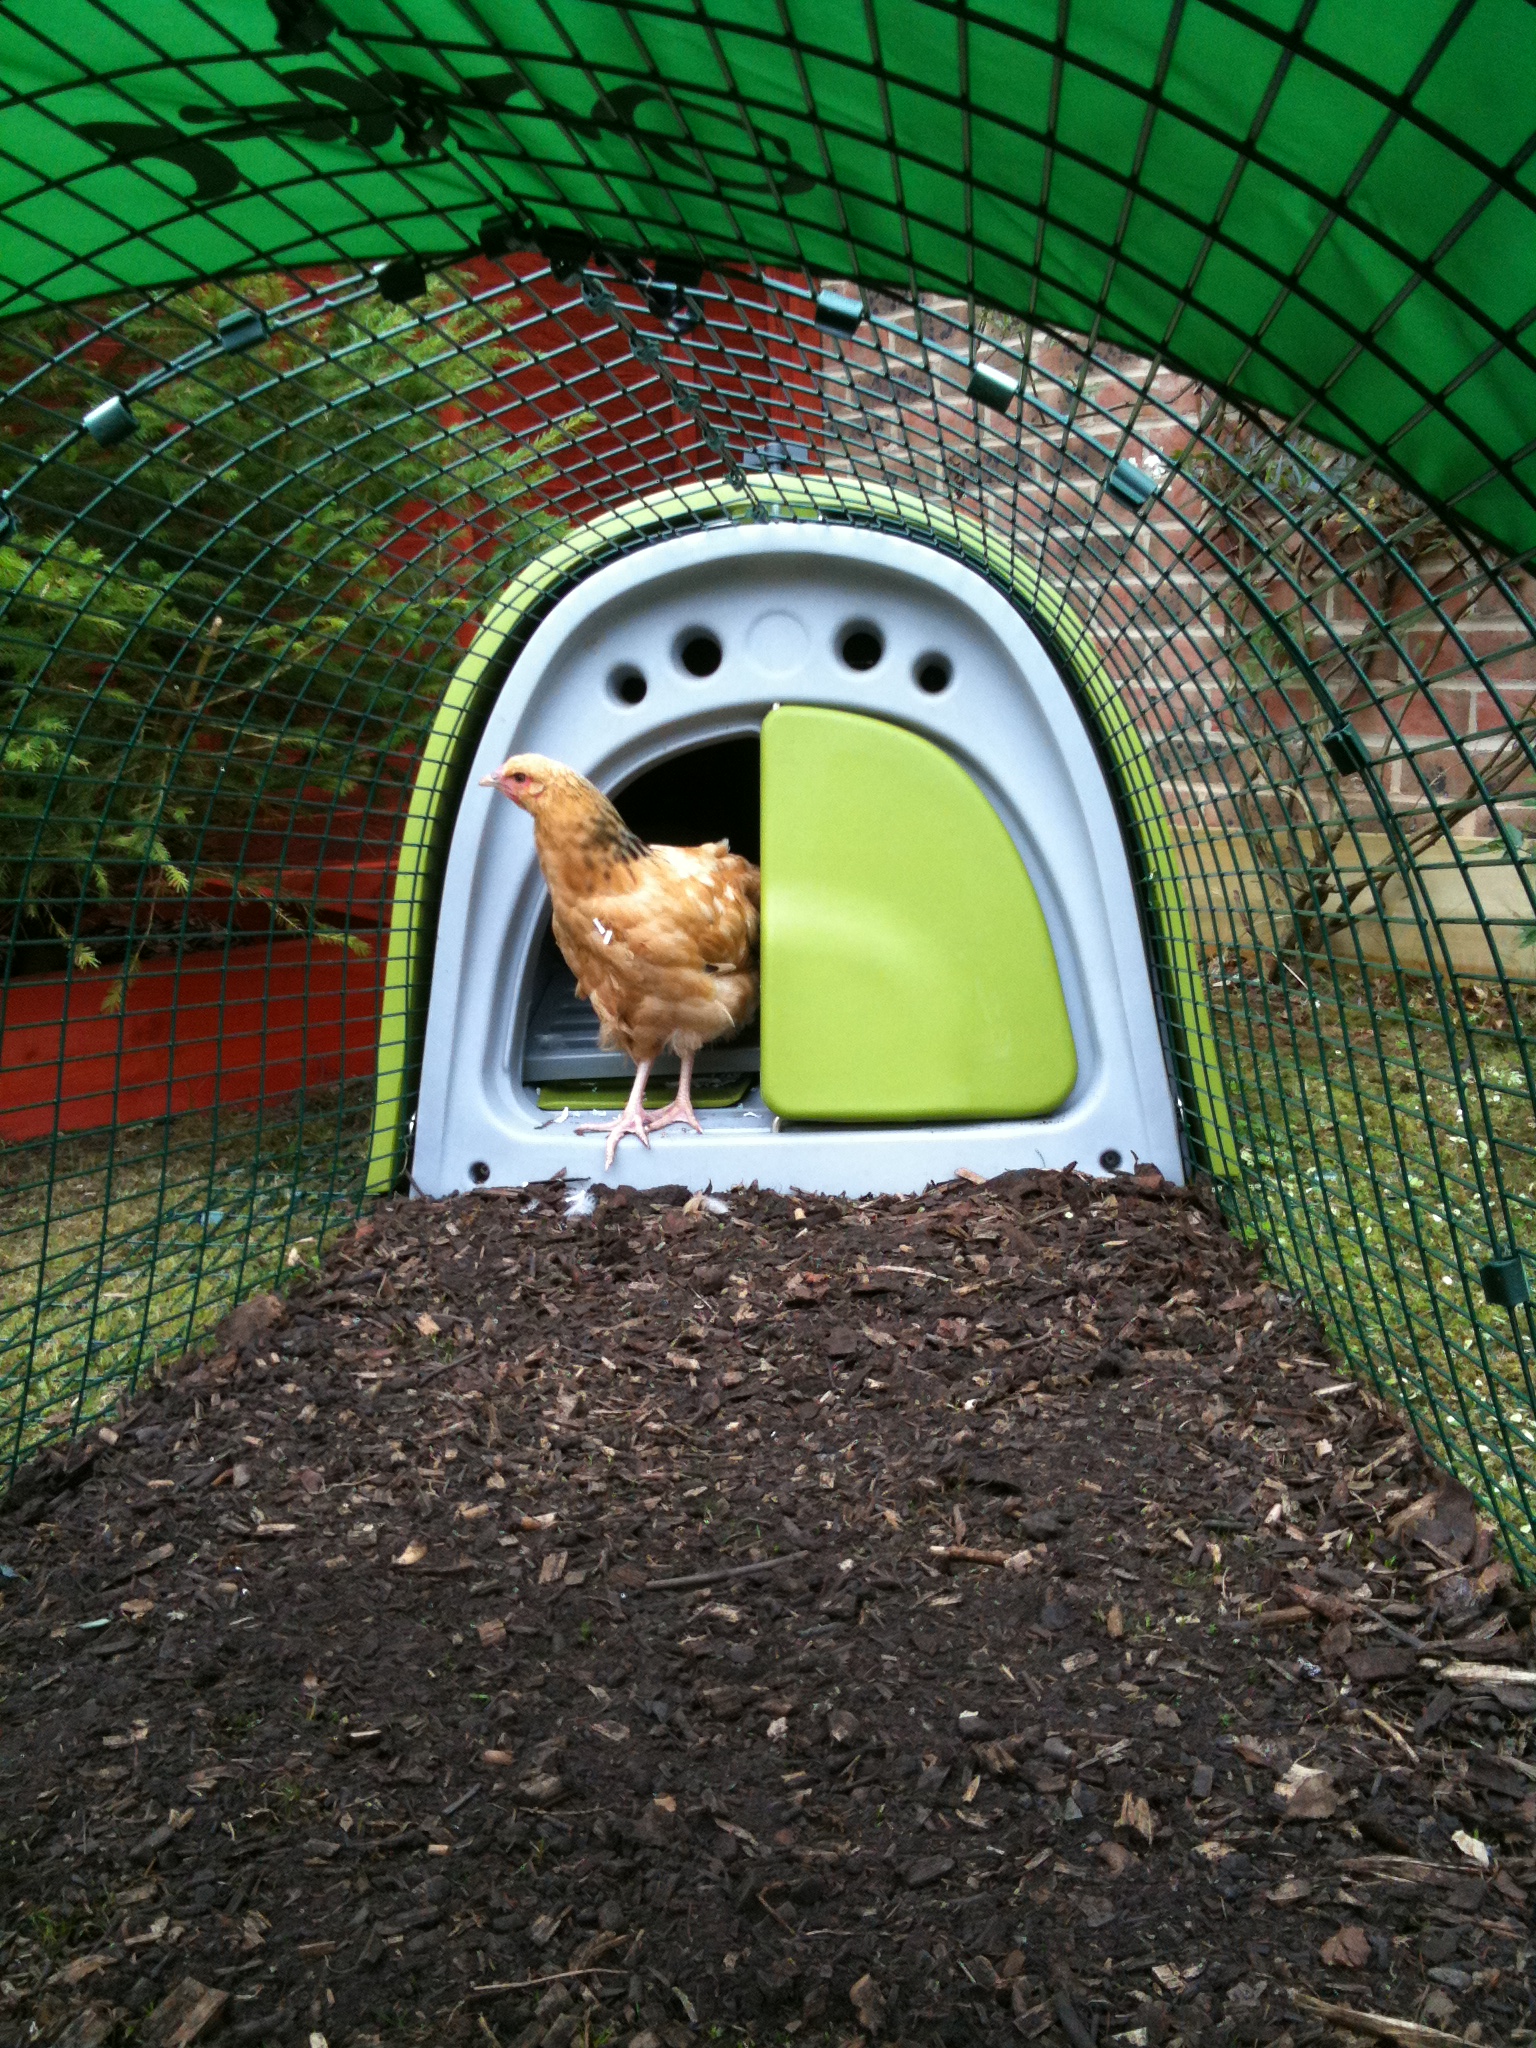 Tim Buswell has put his Eglu Classic on a bed of wood shaving which chickens love